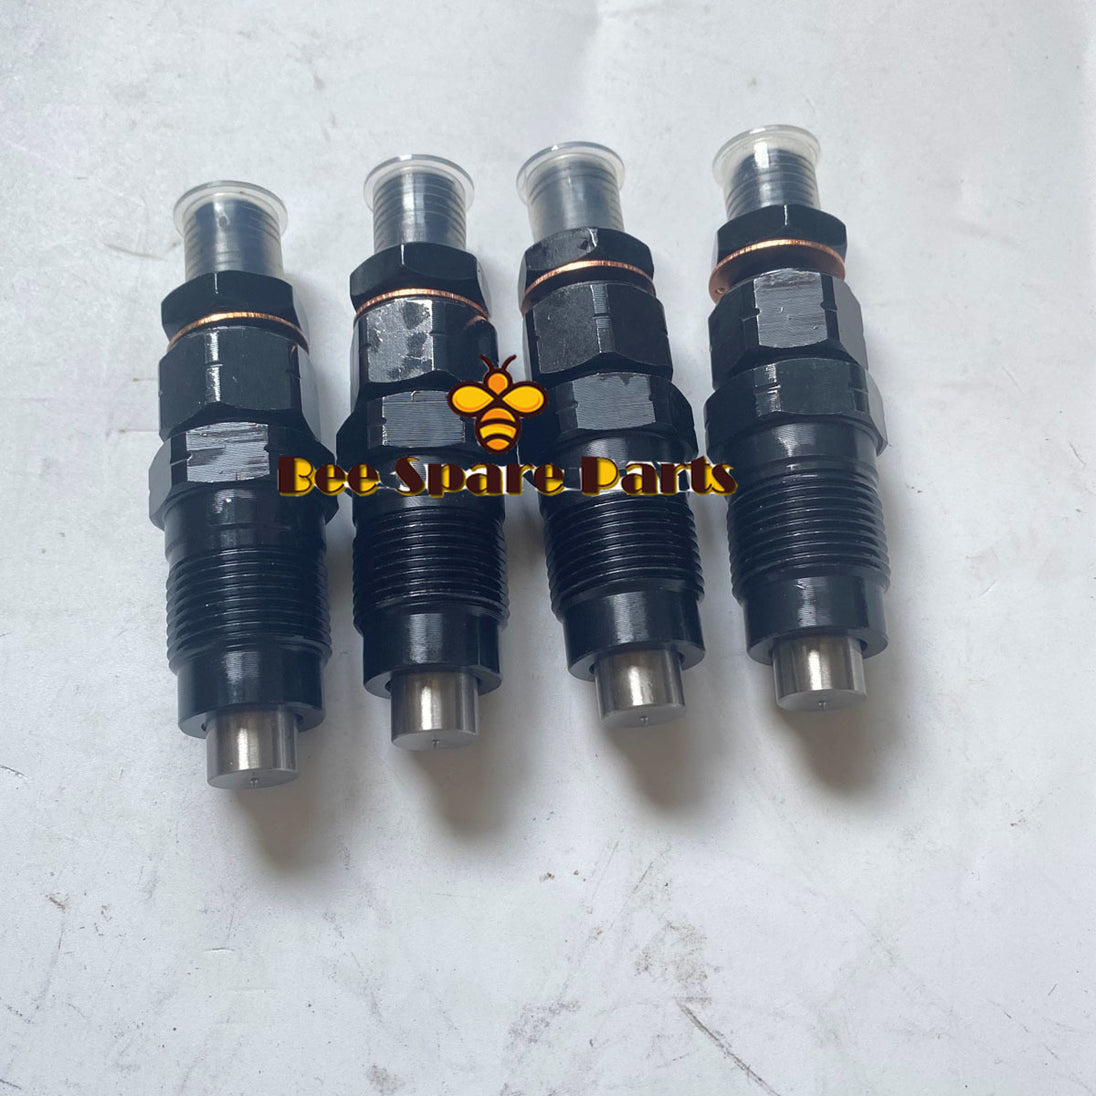 4pcs WL WLT Diesel injector nozzle set and holder assembly WL02-13-H03 for mazda MPV/B2500 for Ford Ranger 2.5D 2.5TD 1998